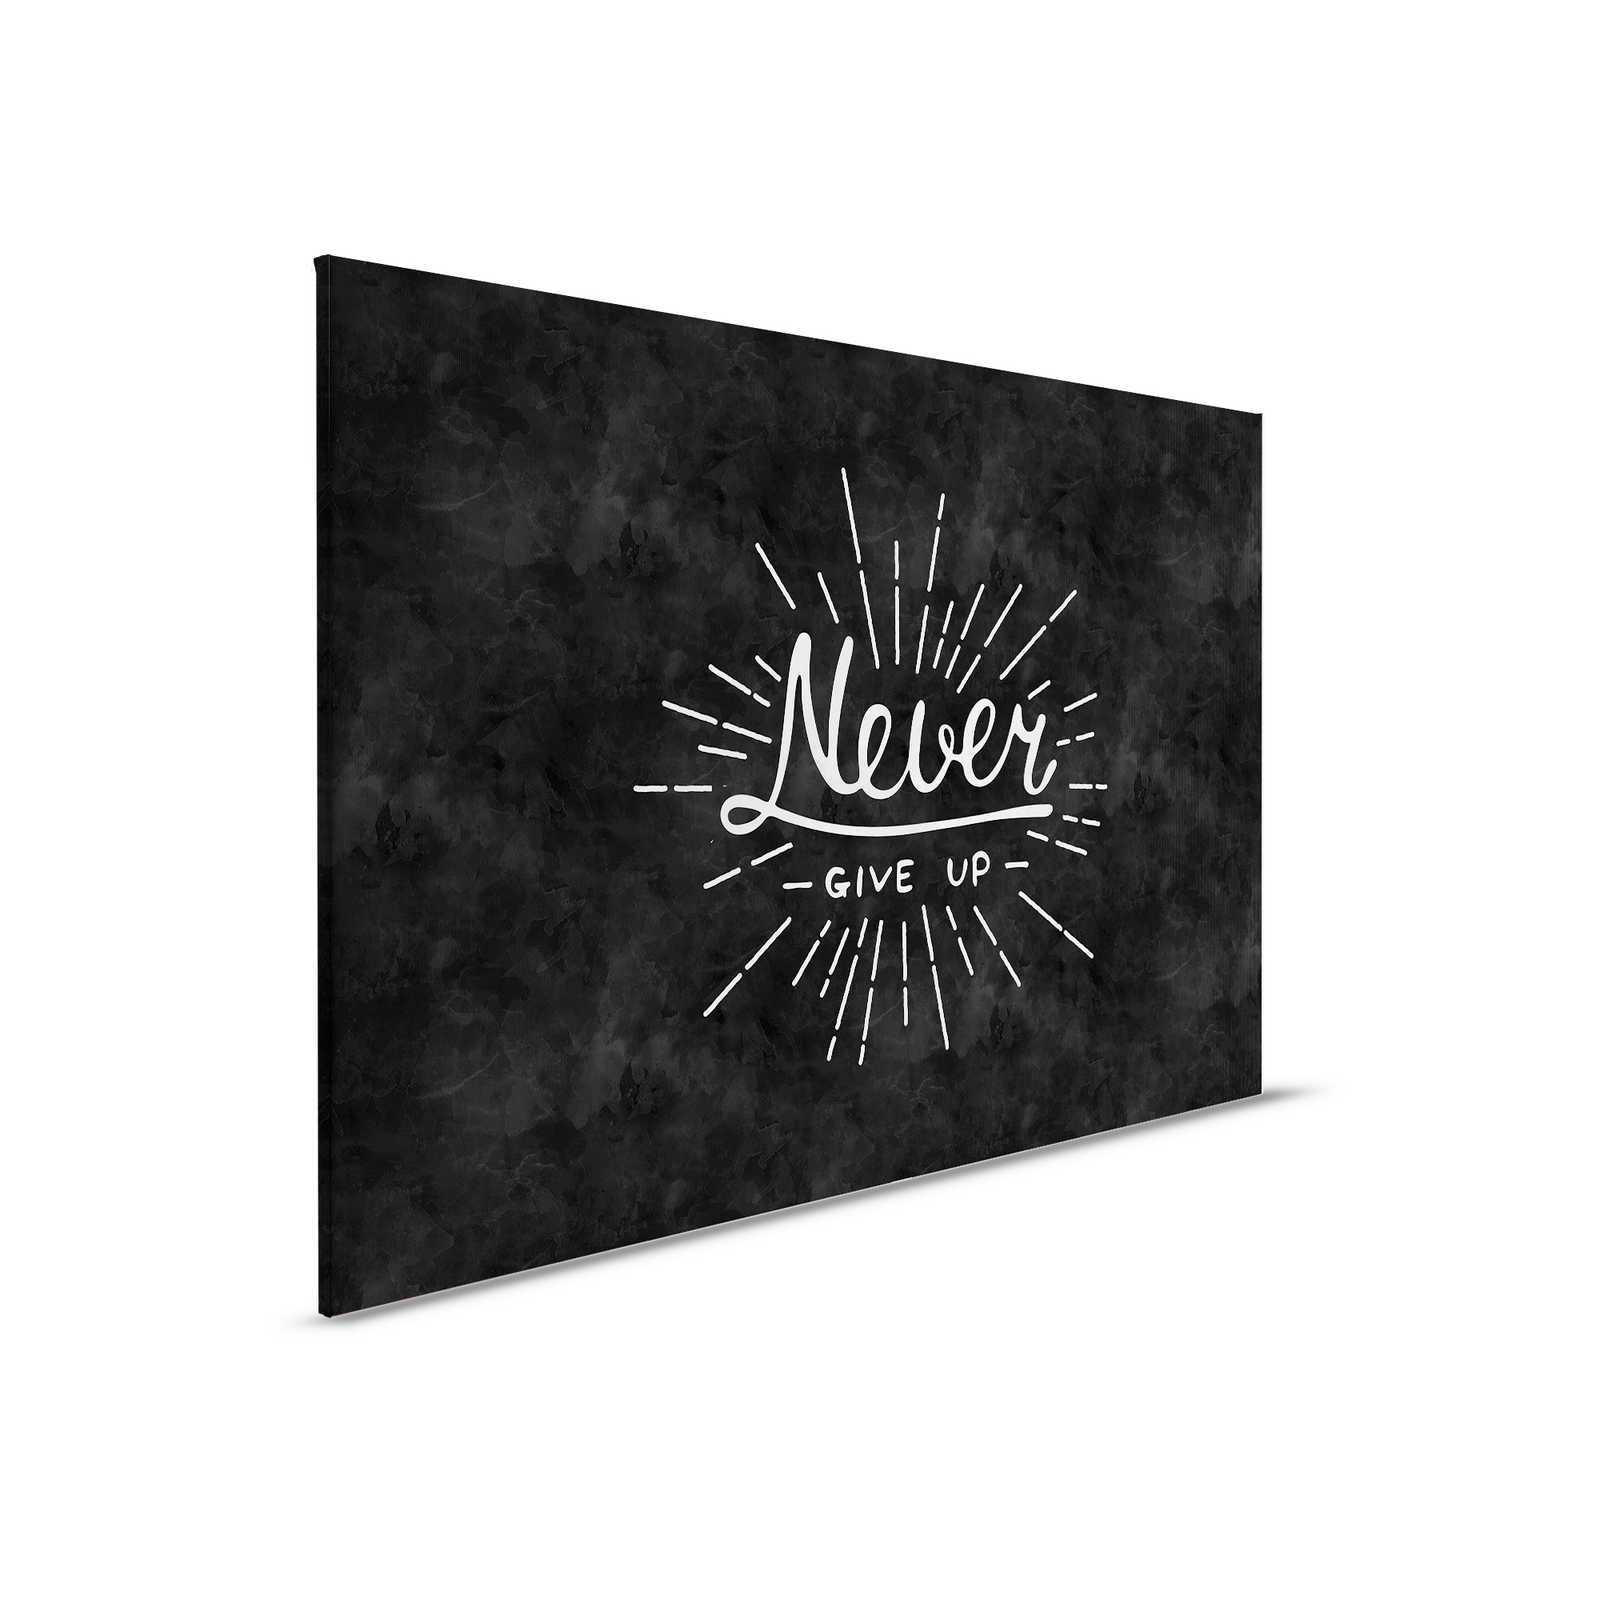         Black and White Chalkboard Design Canvas Painting - 0.90 m x 0.60 m
    